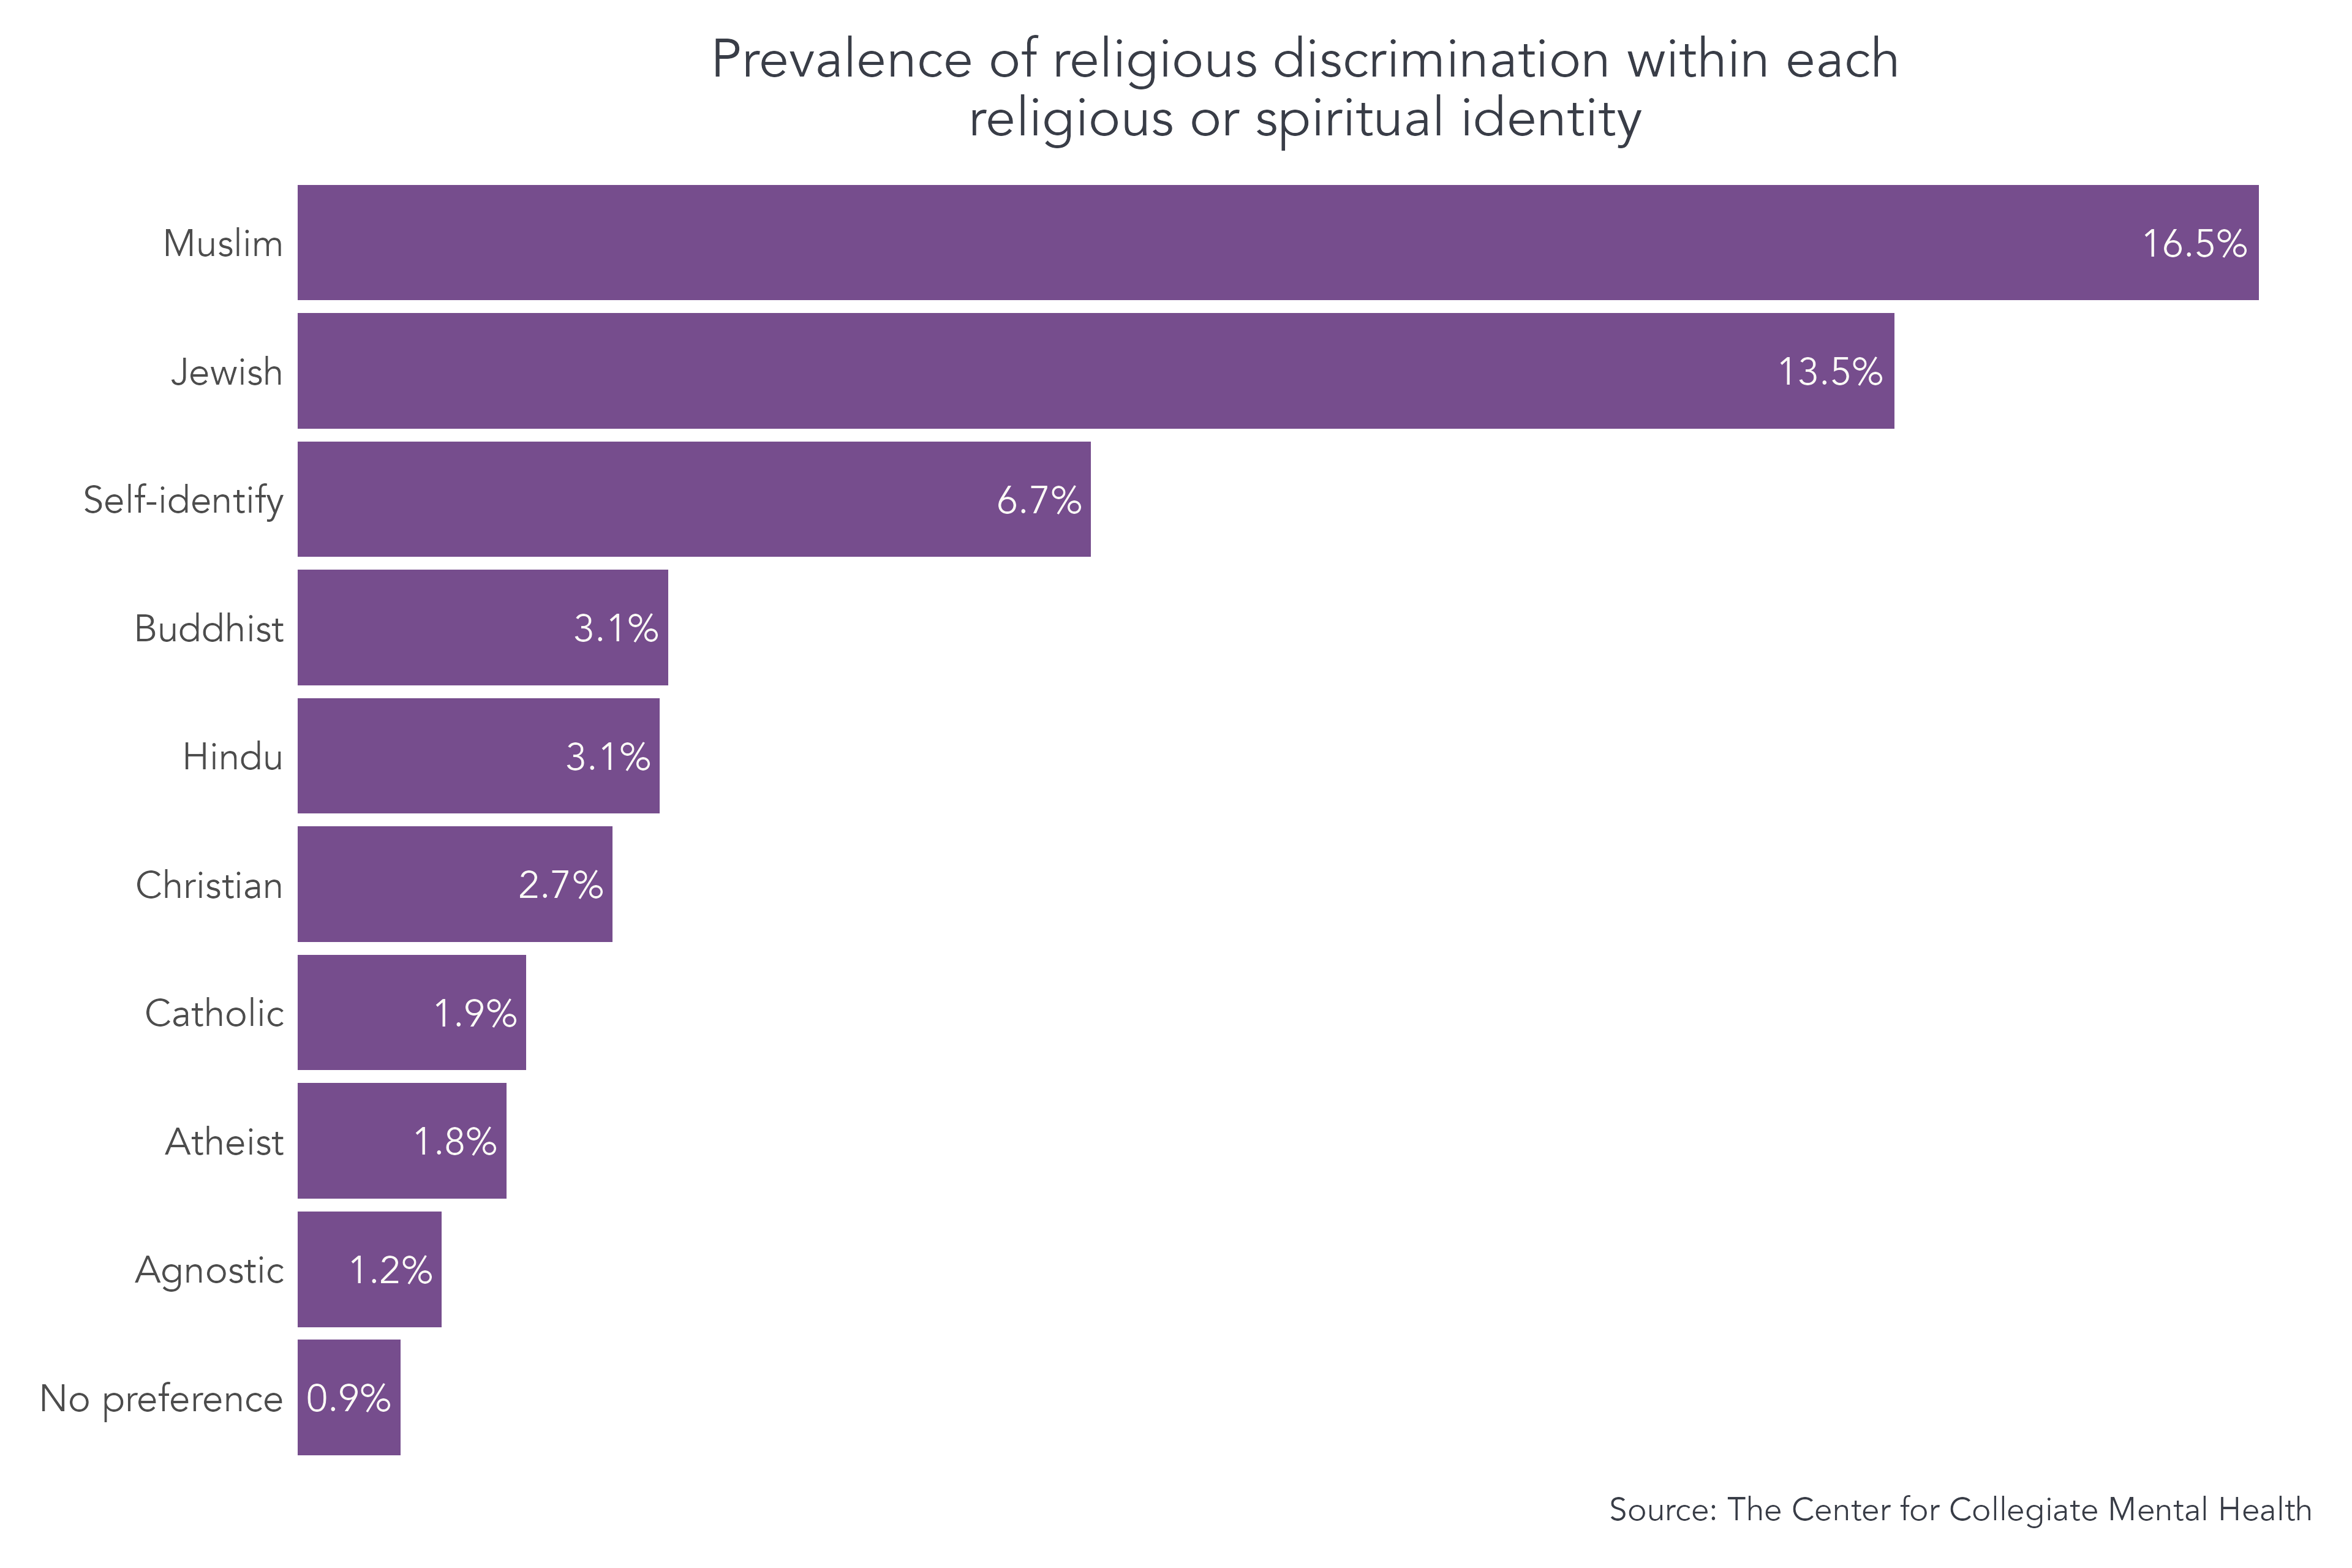 Students who identify as Muslim and Jewish experienced the greatest rates of religious-based discrimination, at 16.5% and 13.5%, respectively.  